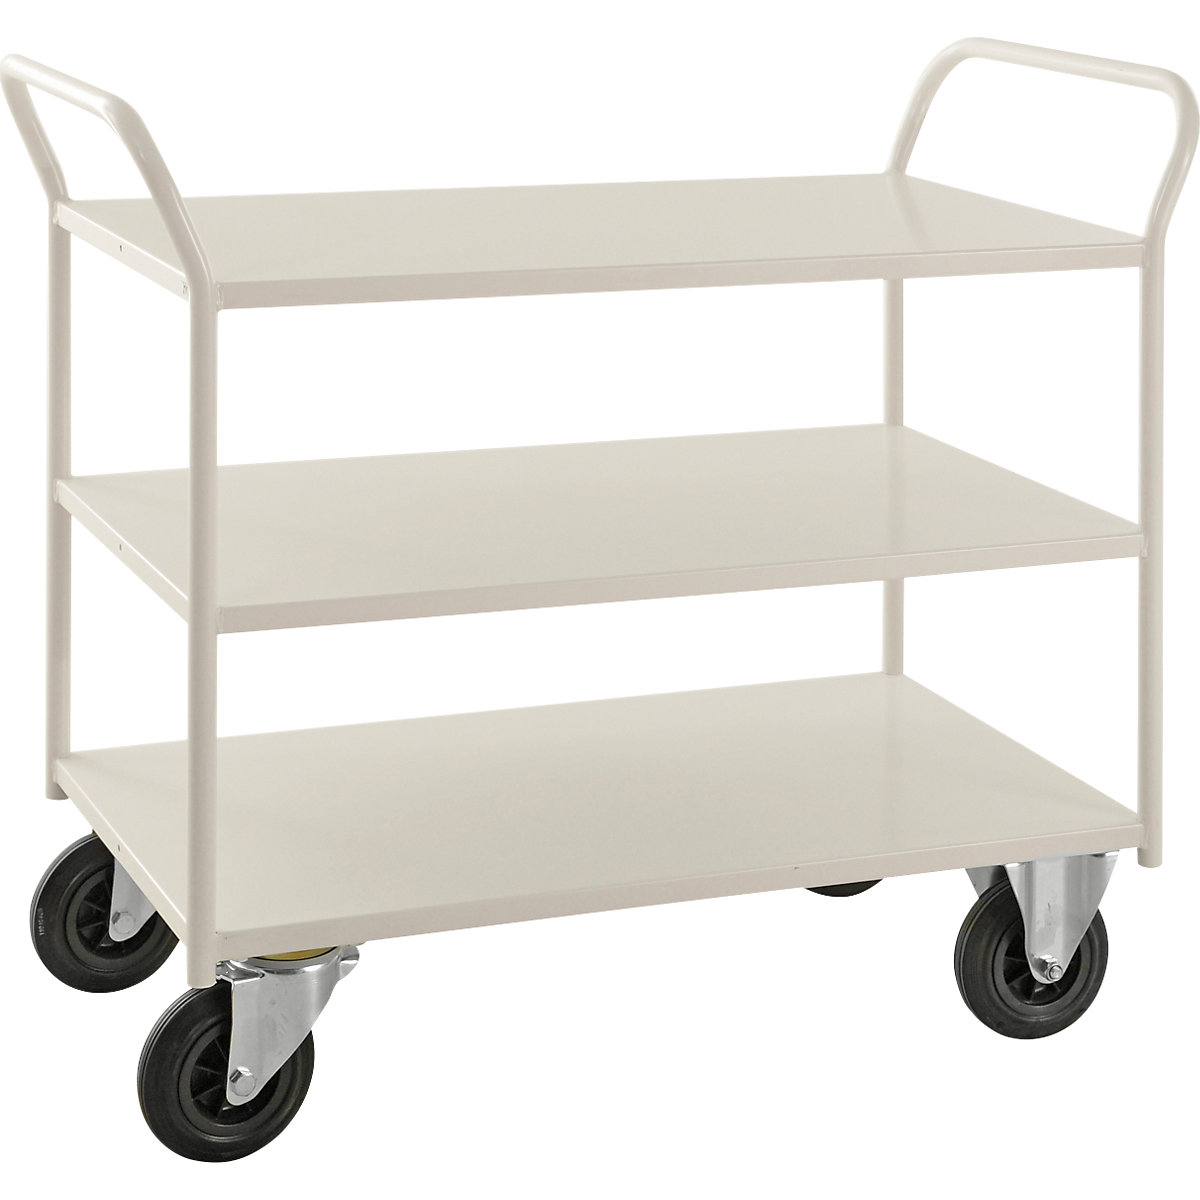 KM41 table trolley – Kongamek, 3 shelves with raised edges, LxWxH 1070 x 550 x 1000 mm, white, 2 swivel castors and 2 fixed castors, 5+ items-2